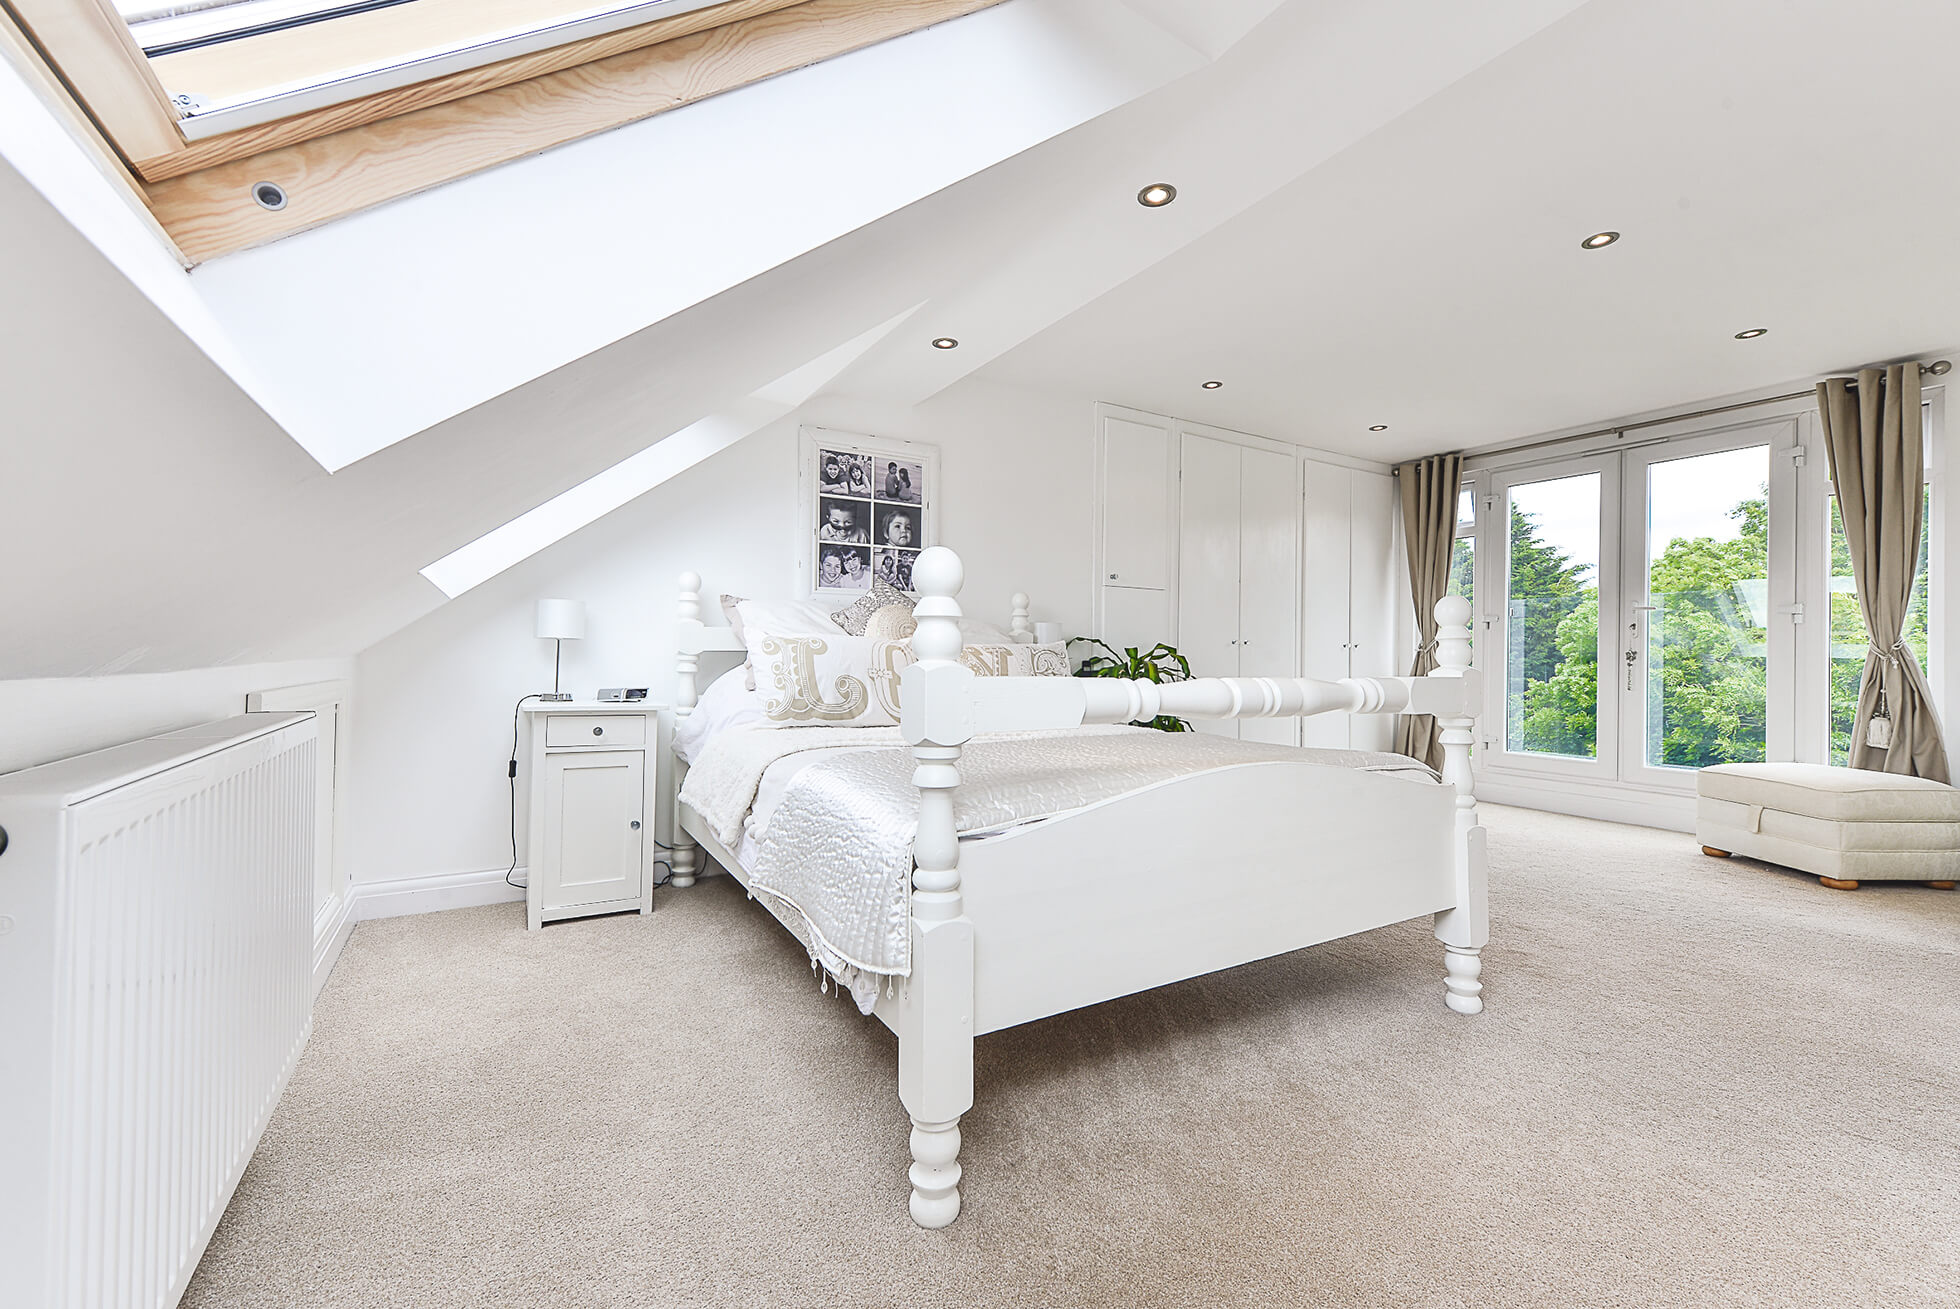 Do you have a question about converting your Loft in Bushey? Here are the most popular questions asked by our clients.